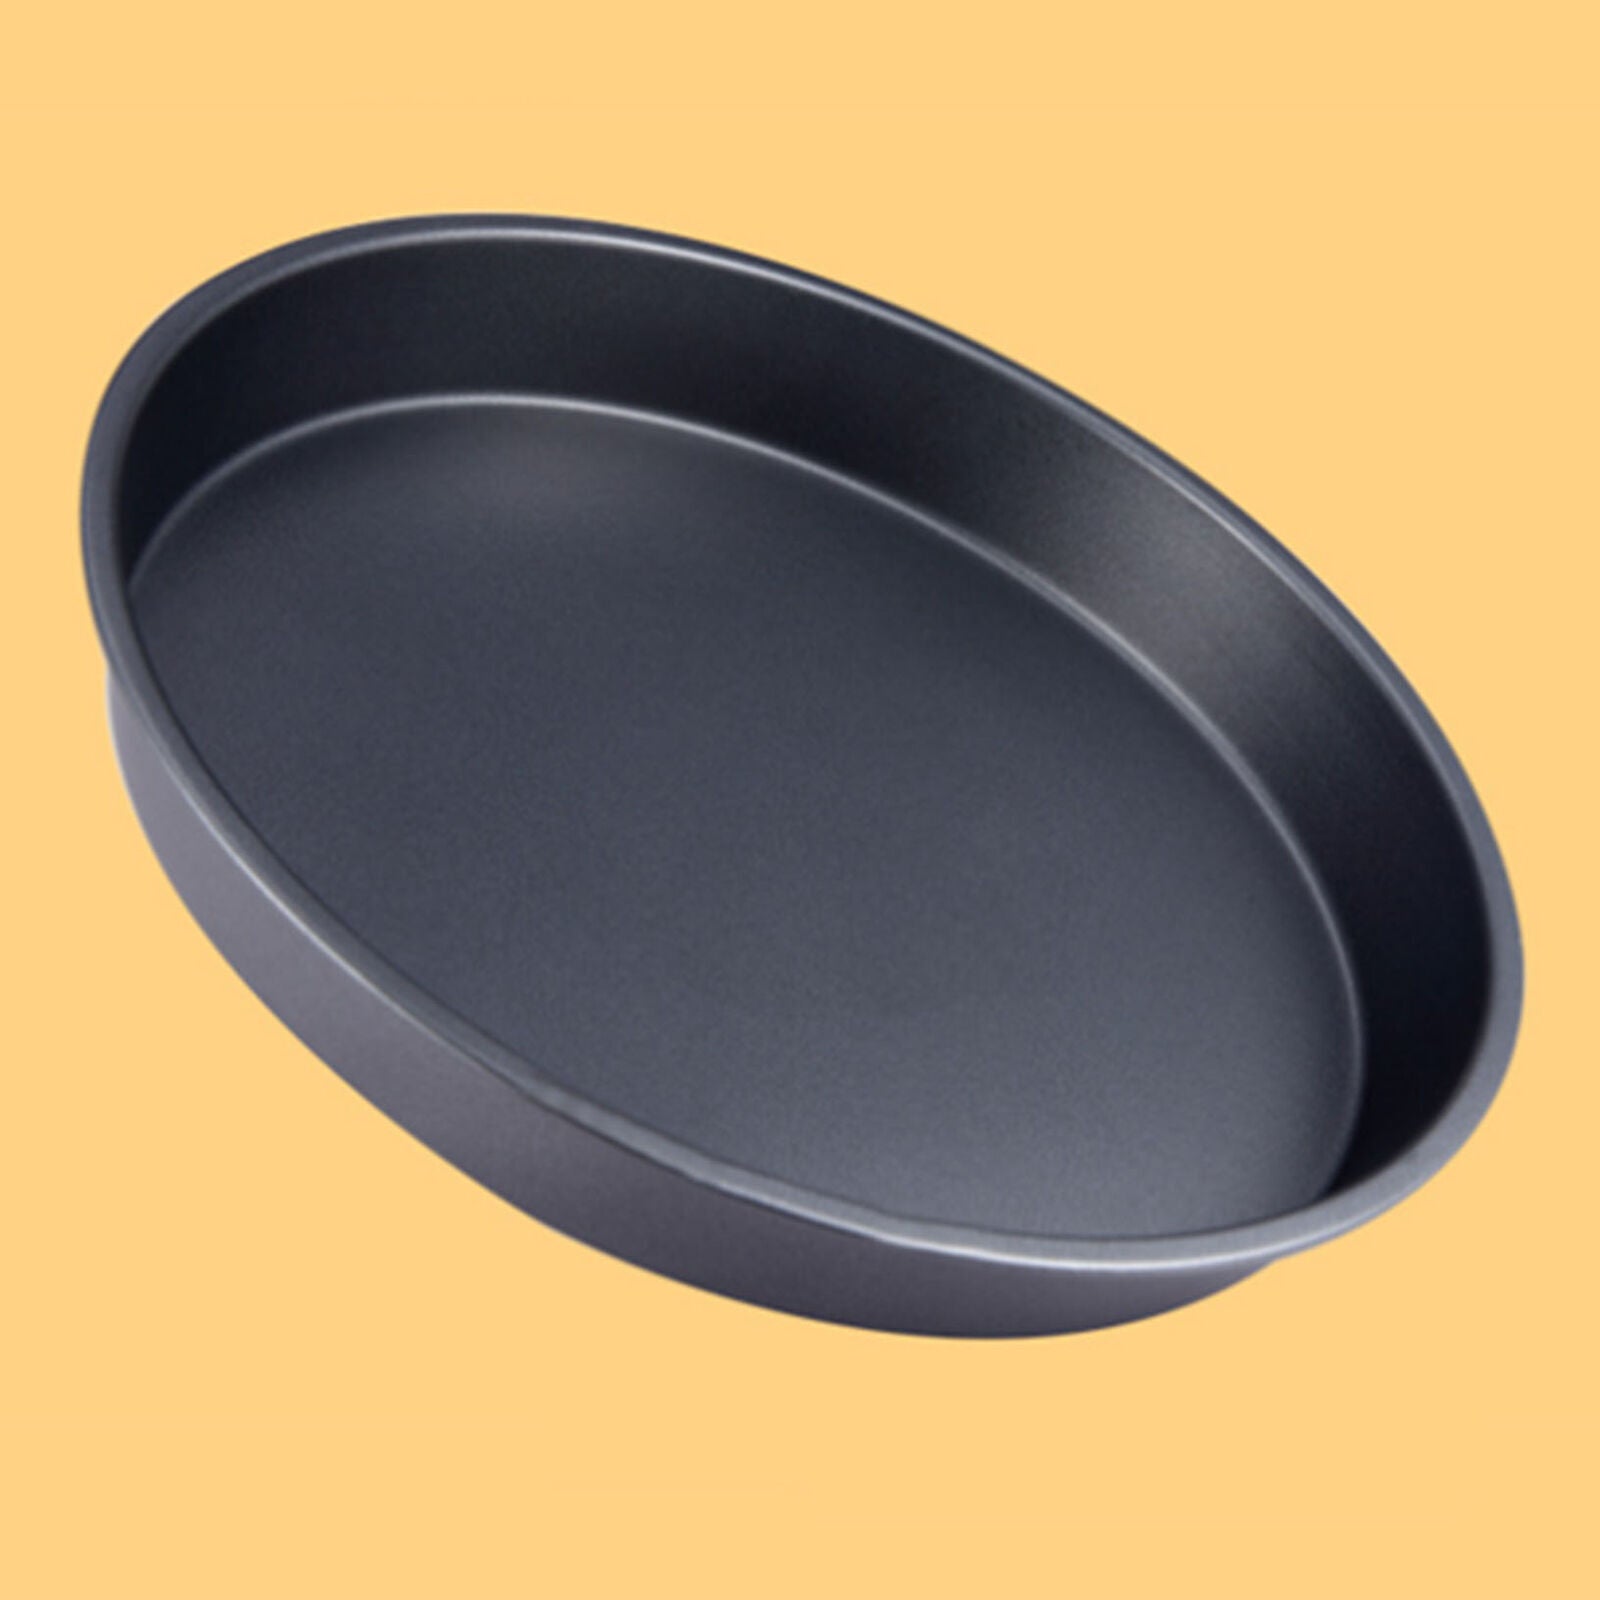 25cm Non-Stick Pizza Pan Oven Baking Tray Mold Microwave Cake Dish Mould